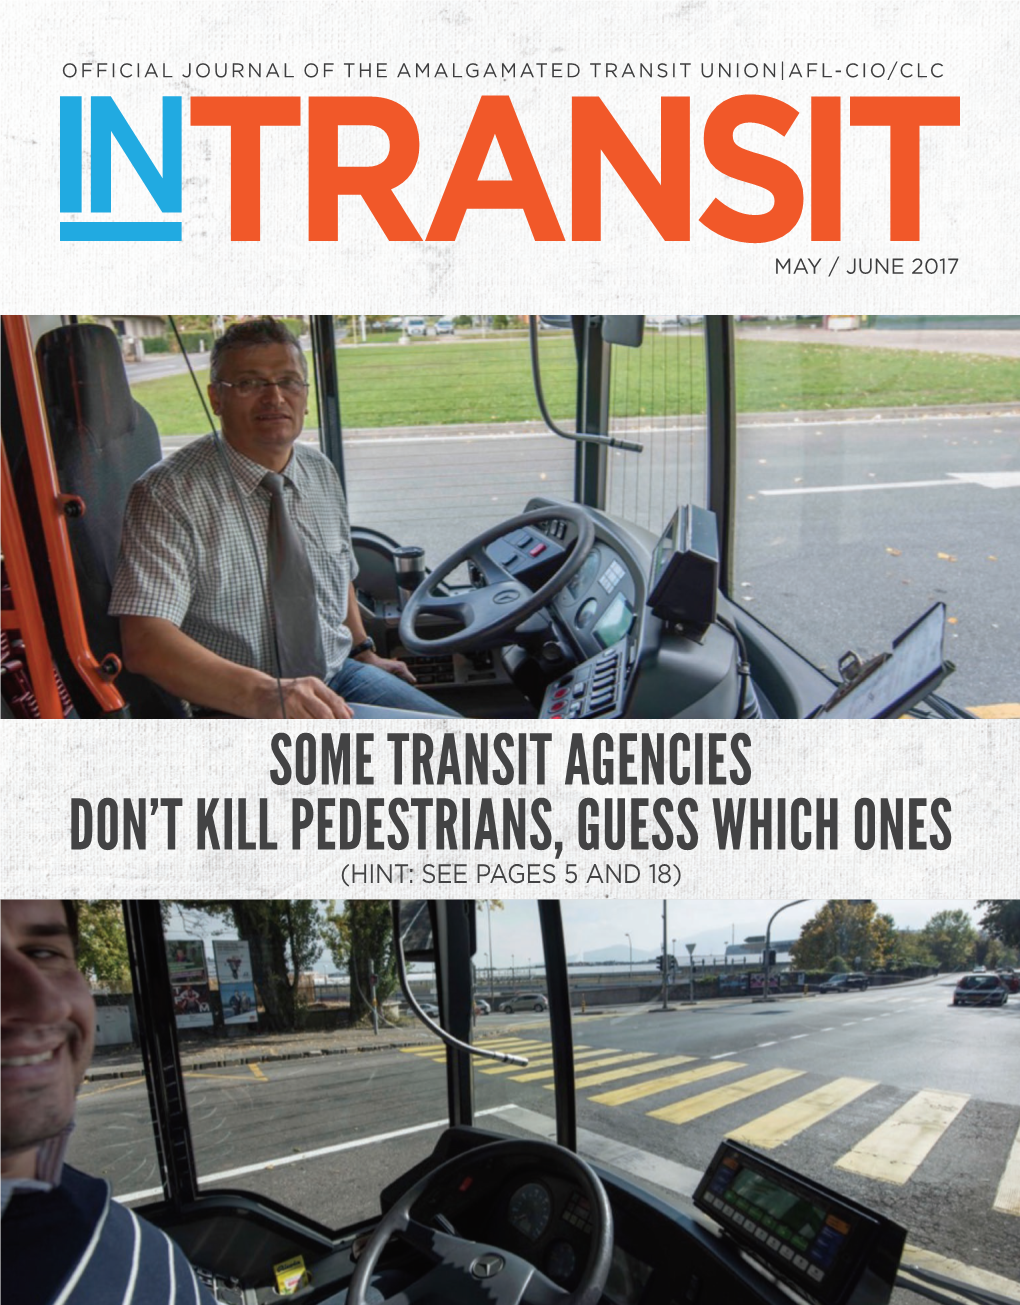 Some Transit Agencies Don't Kill Pedestrians, Guess Which Ones